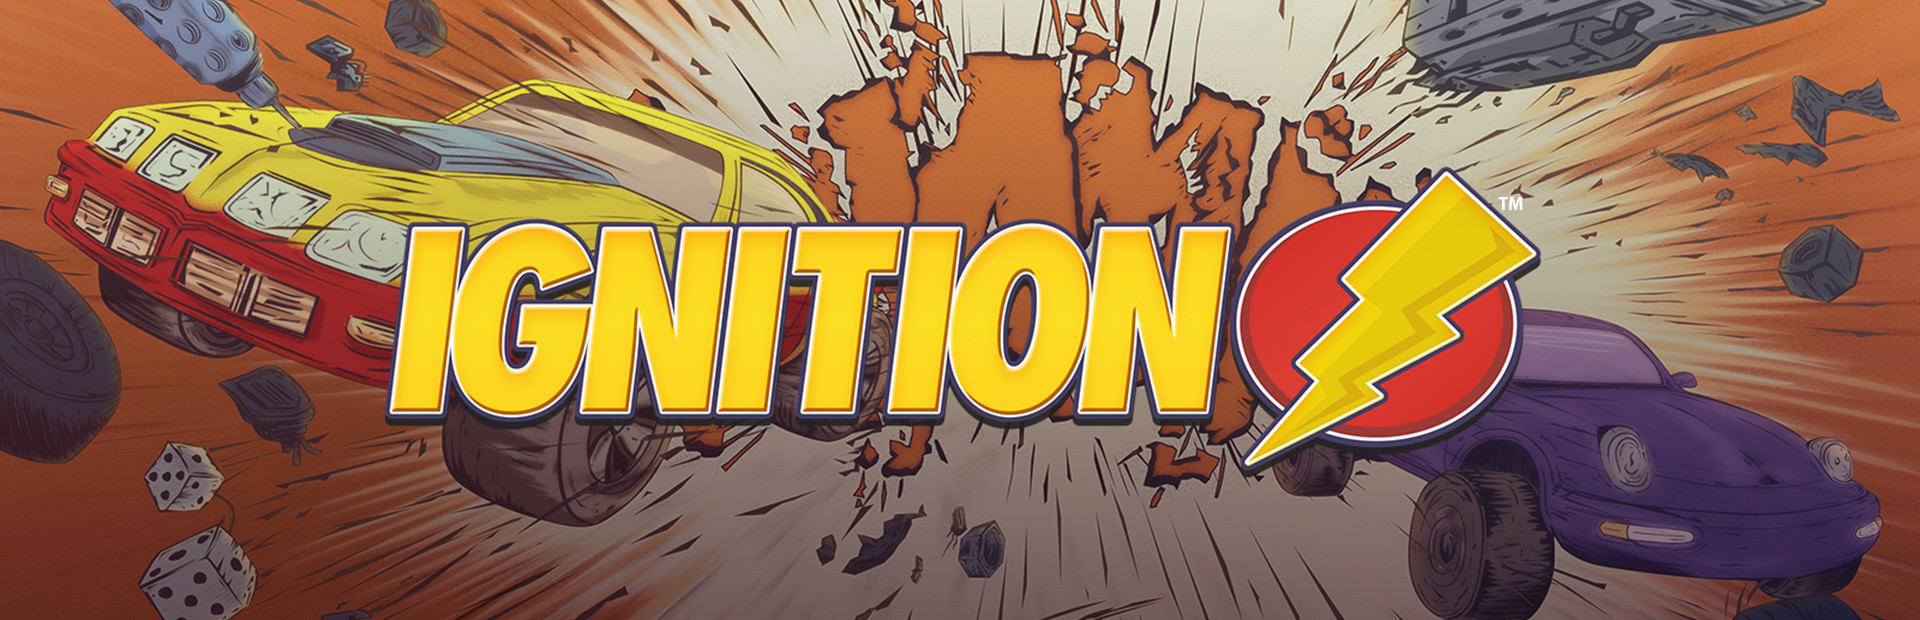 Ignition cover image